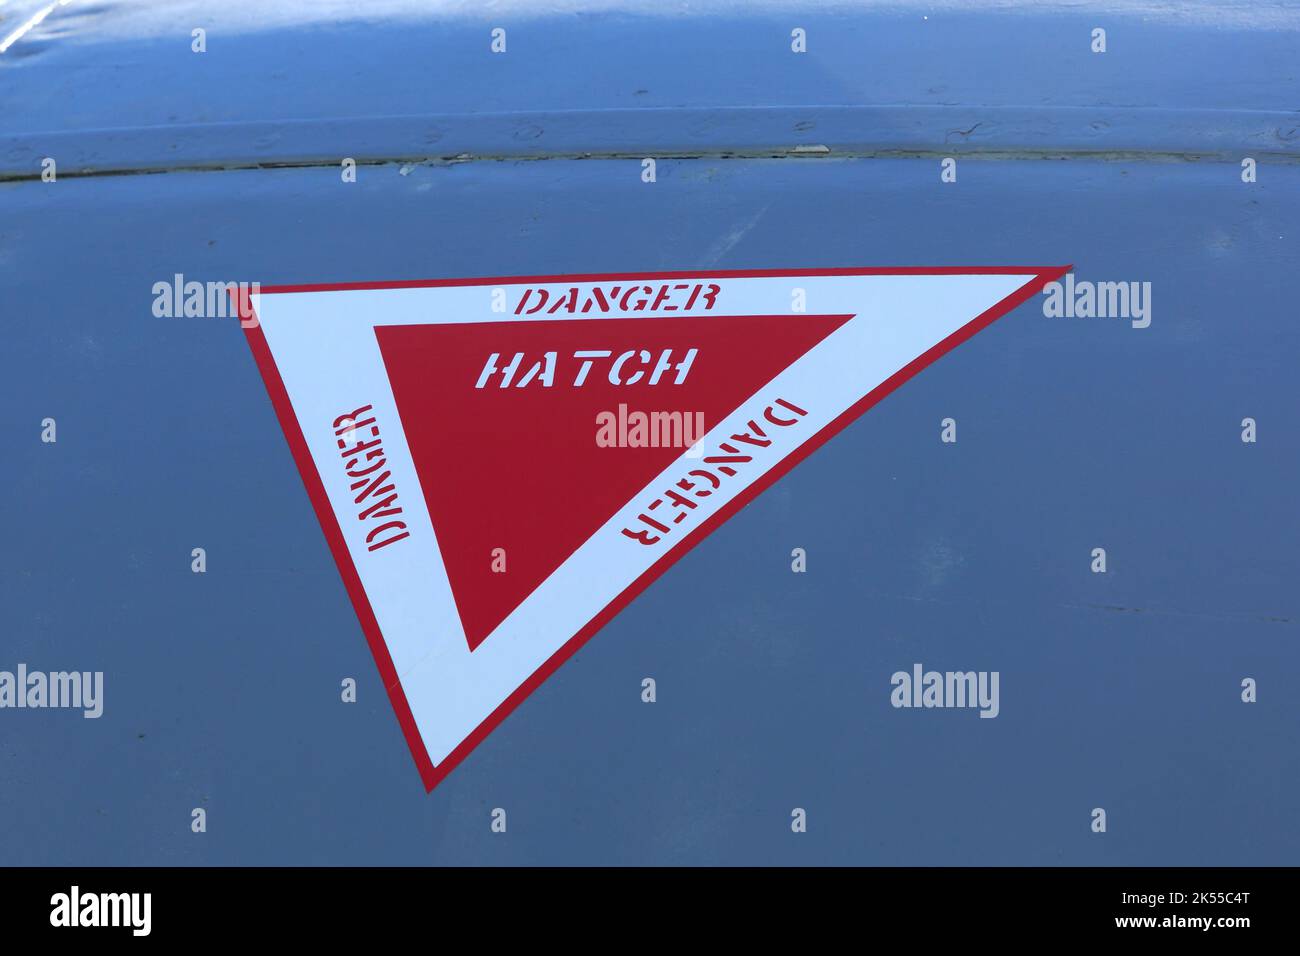 Danger Hatch sign on an old jet plane Stock Photo